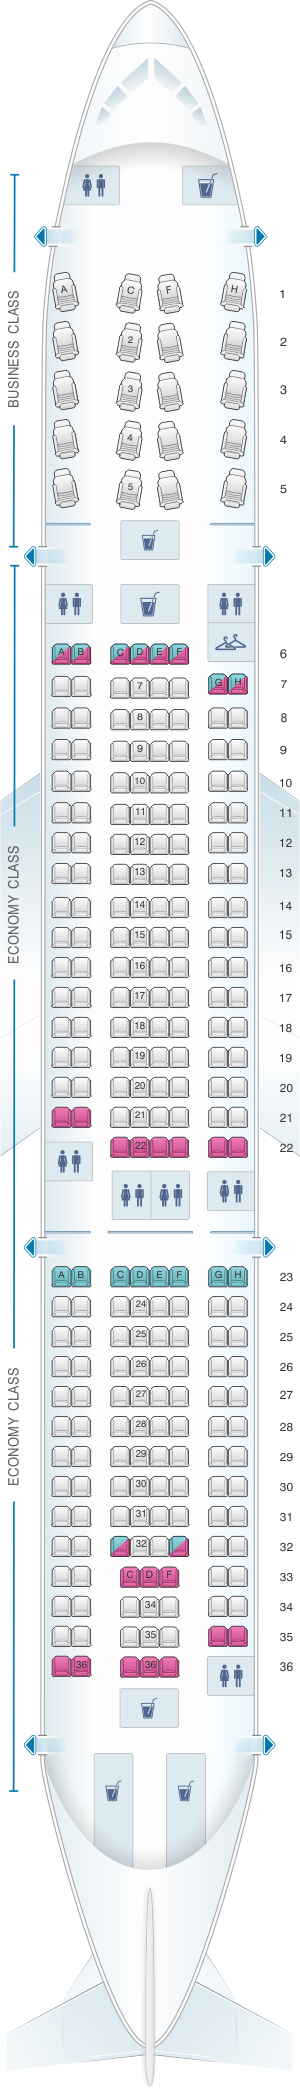 Seat map for American Airlines Airbus A330 200